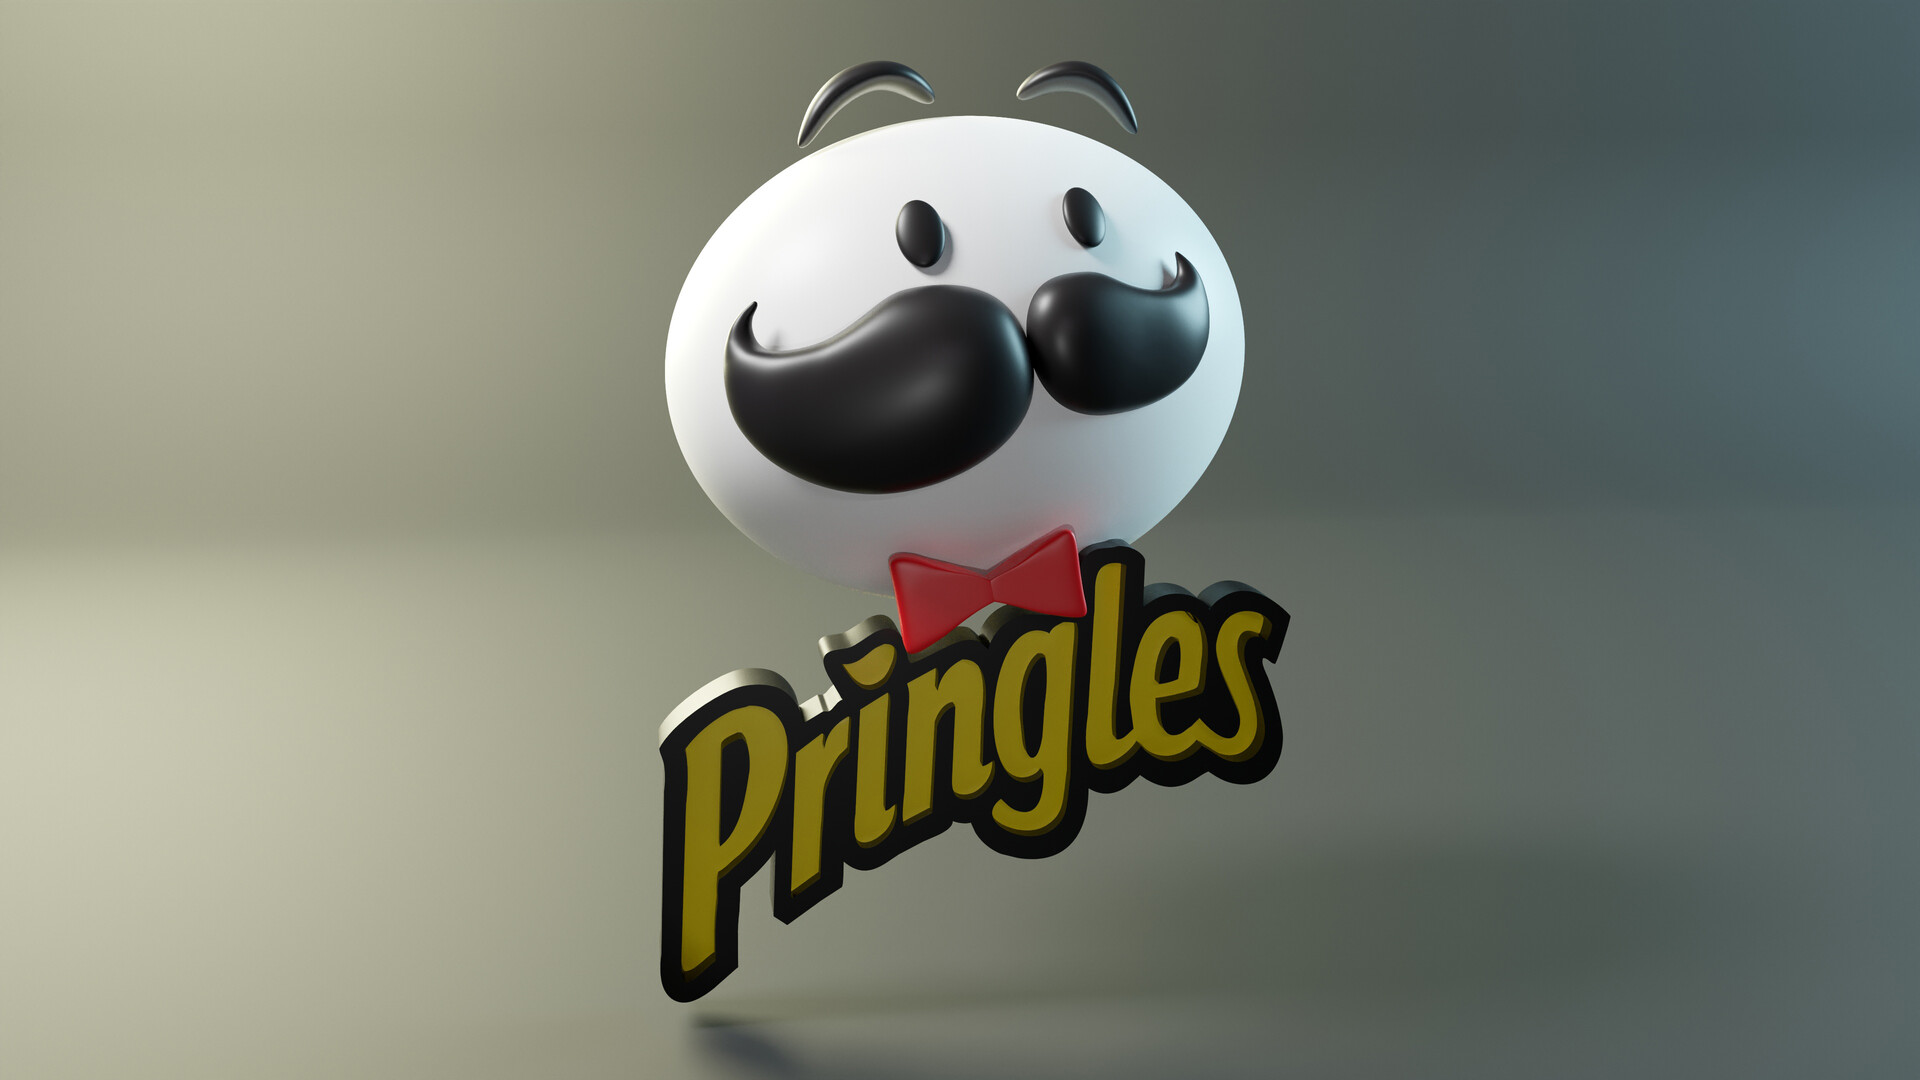 products, pringles